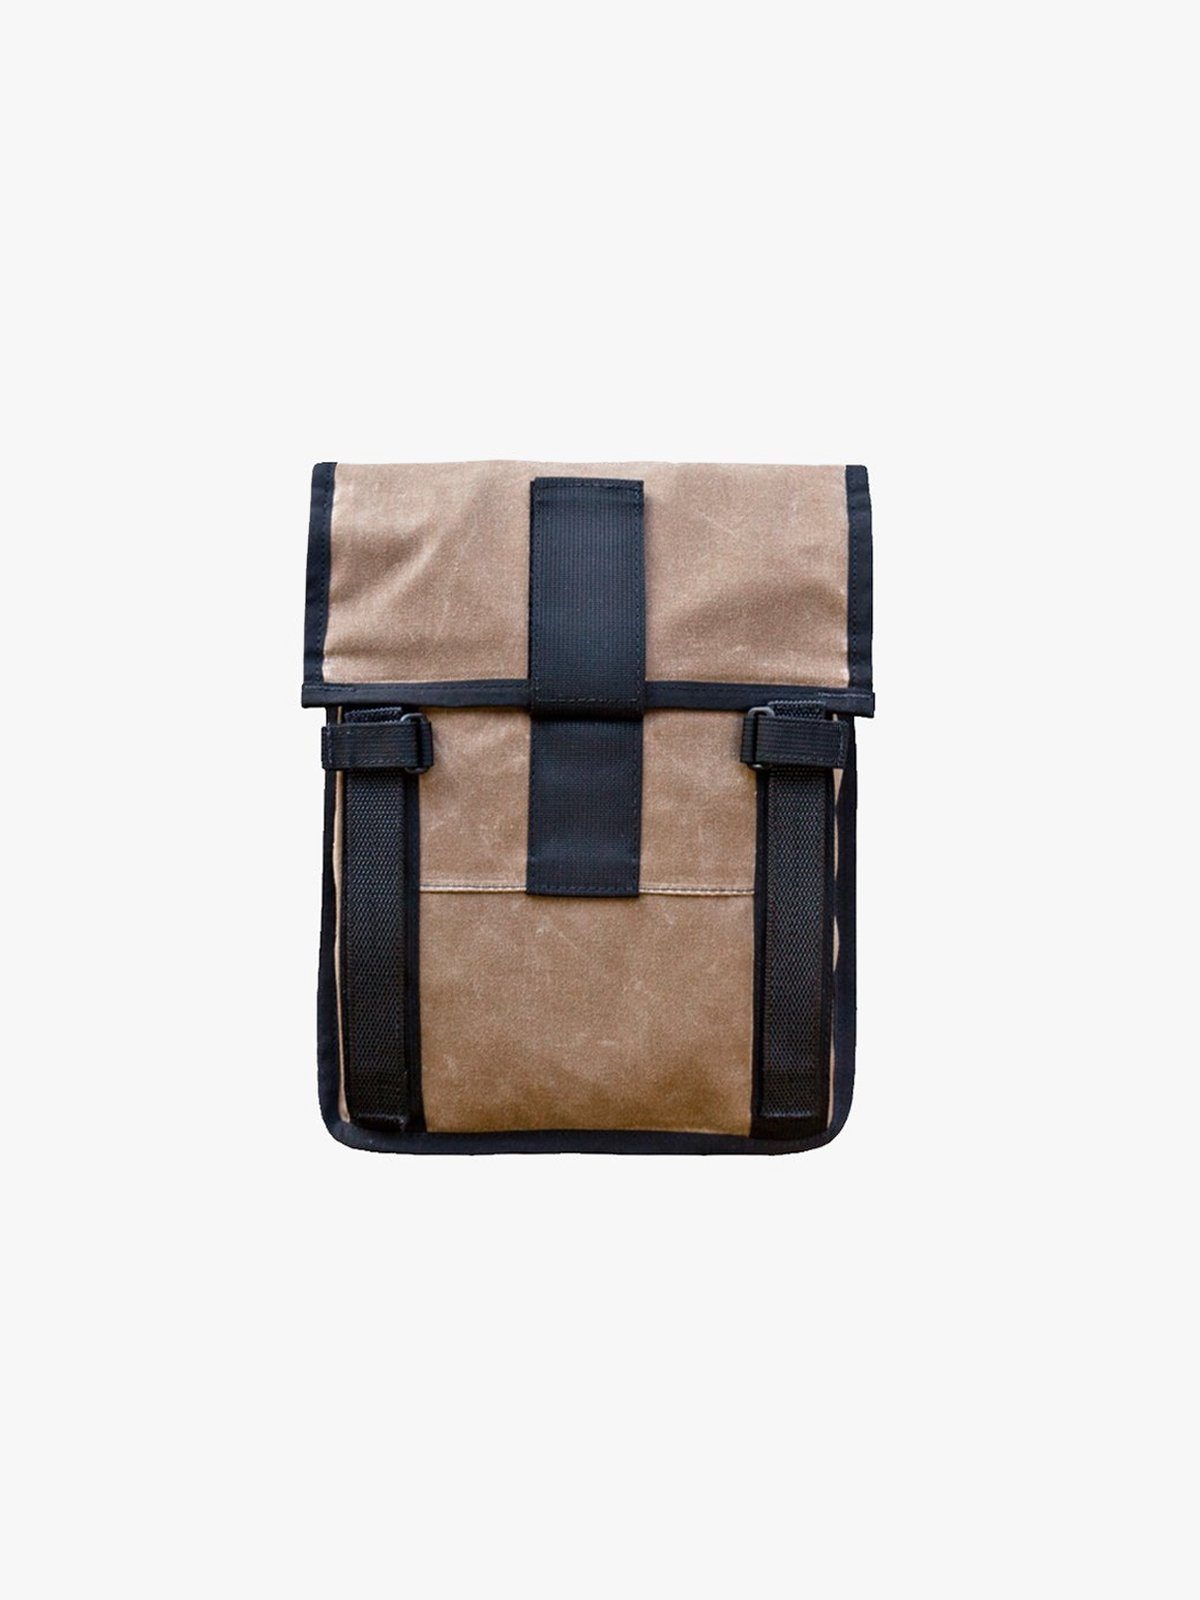 Arkiv Folio by Mission Workshop - Weatherproof Bags & Technical Apparel - San Francisco & Los Angeles - Built to endure - Guaranteed forever